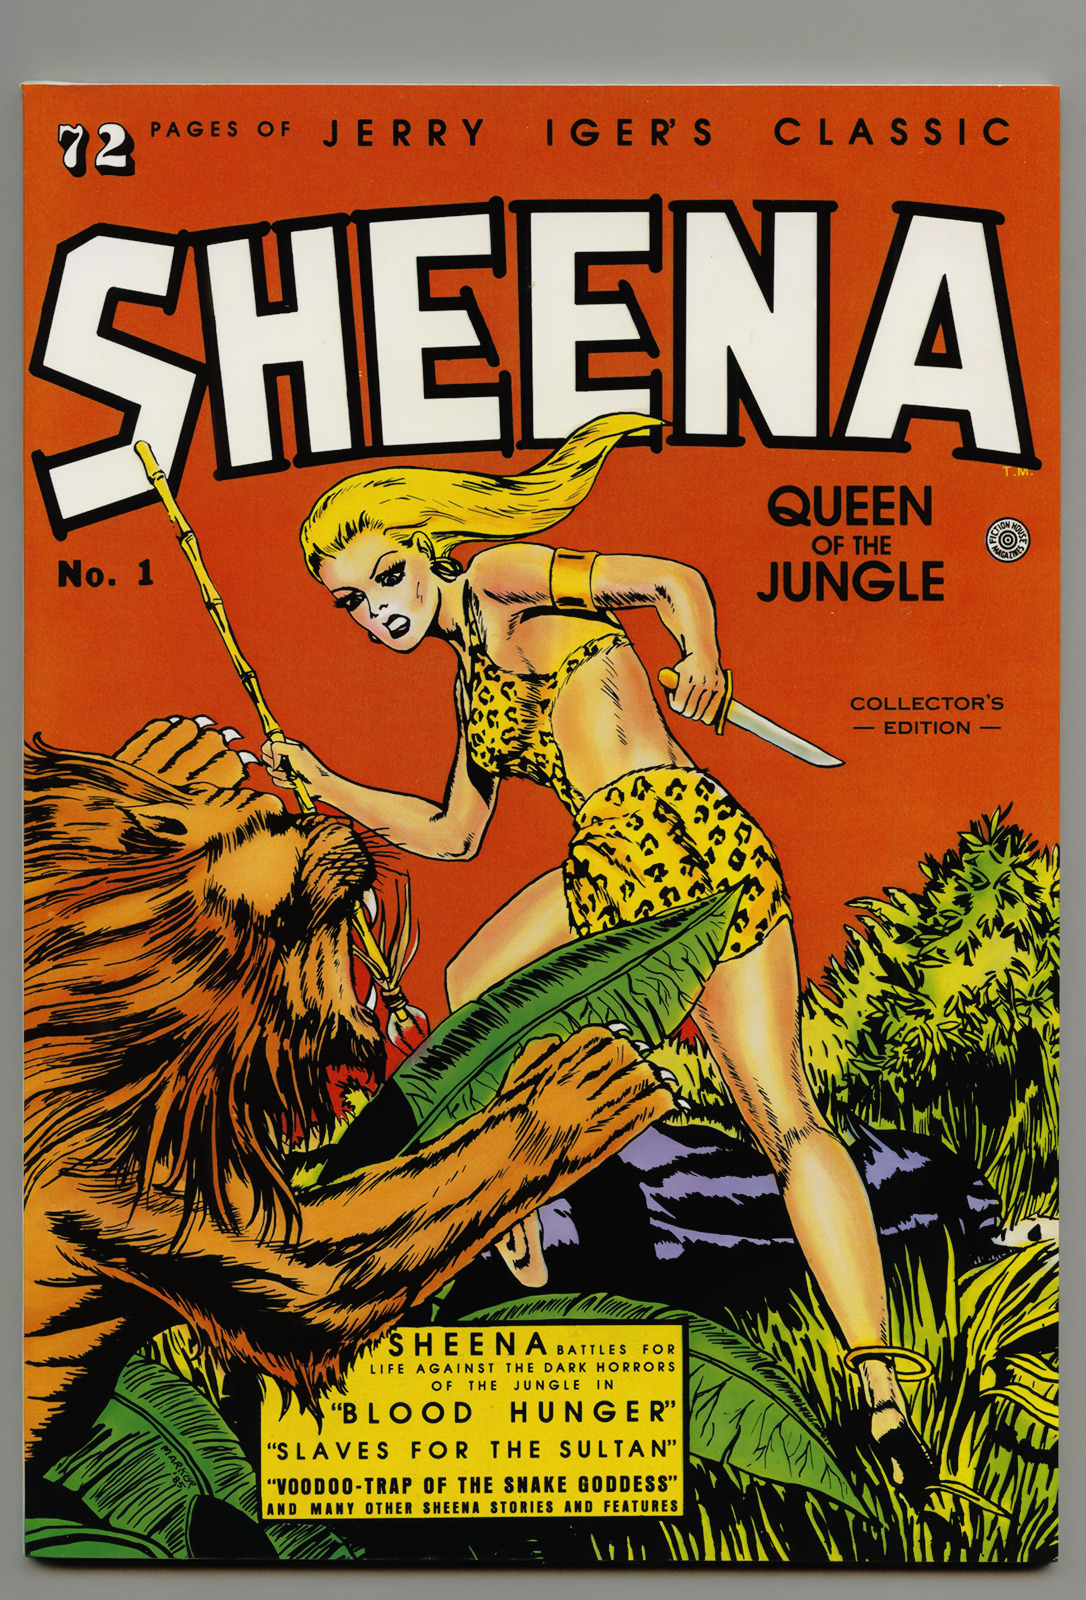 JERRY IGER'S CLASSIC SHEENA QUEEN OF THE JUNGLE #1  DAVE STEVENS' SHEENA AD NM